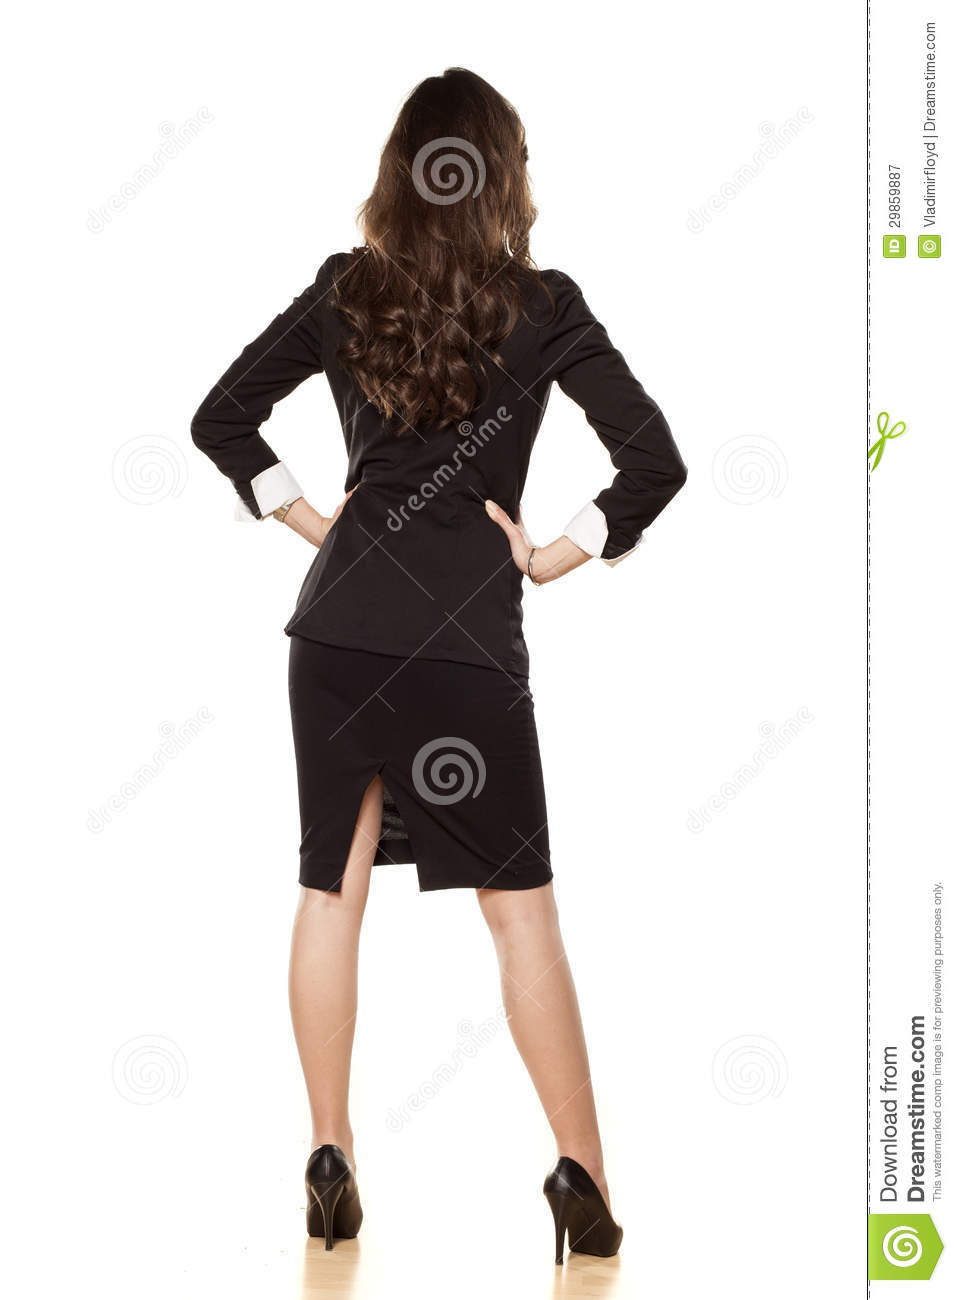 Rear View On The Business Woman Royalty Free Stock Photography   Image    